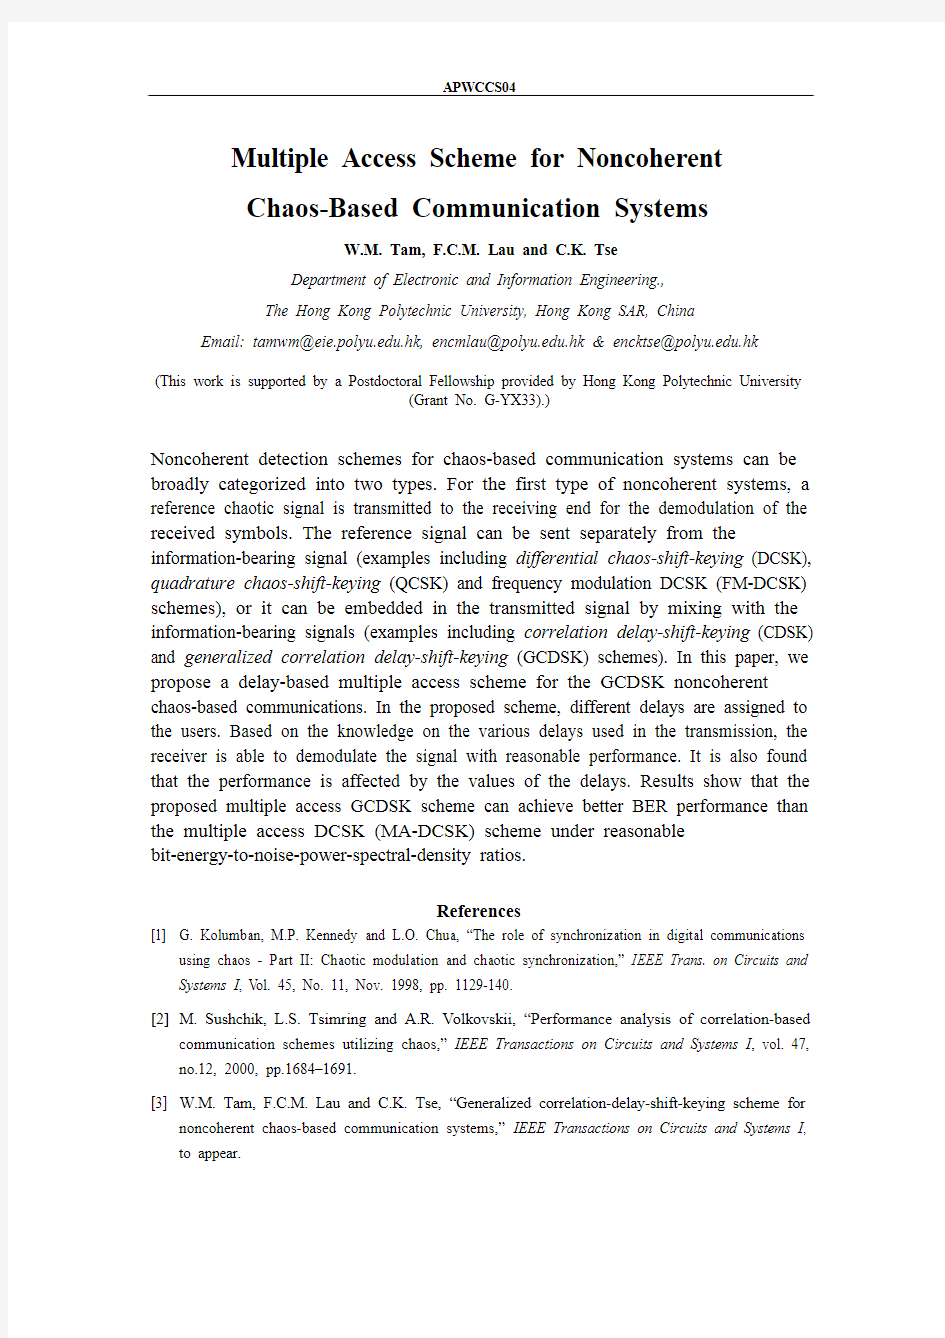 APWCCS04 Multiple Access Scheme for Noncoherent Chaos-Based Communication Systems